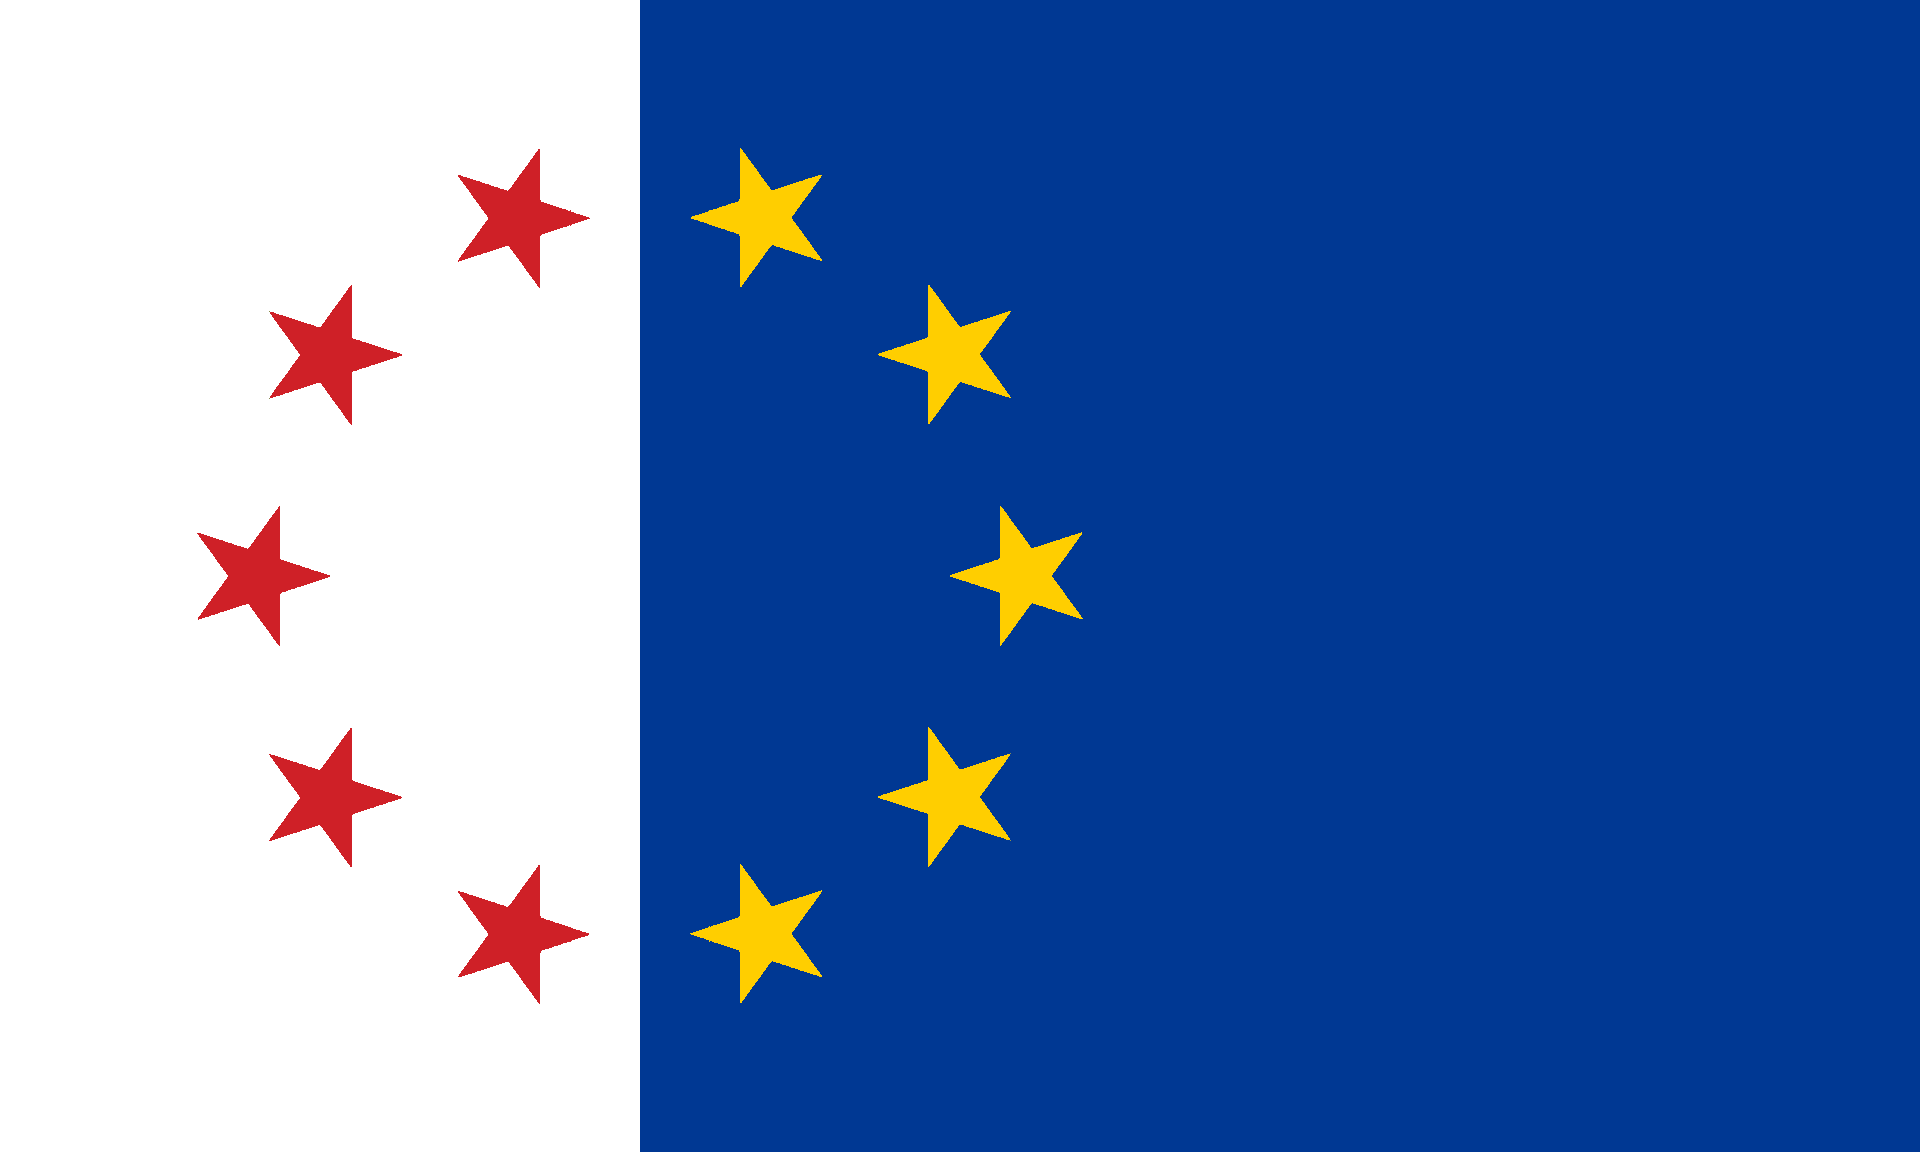 Wallpaper Of The Flag Of Cape Verde [Redesigned Version]